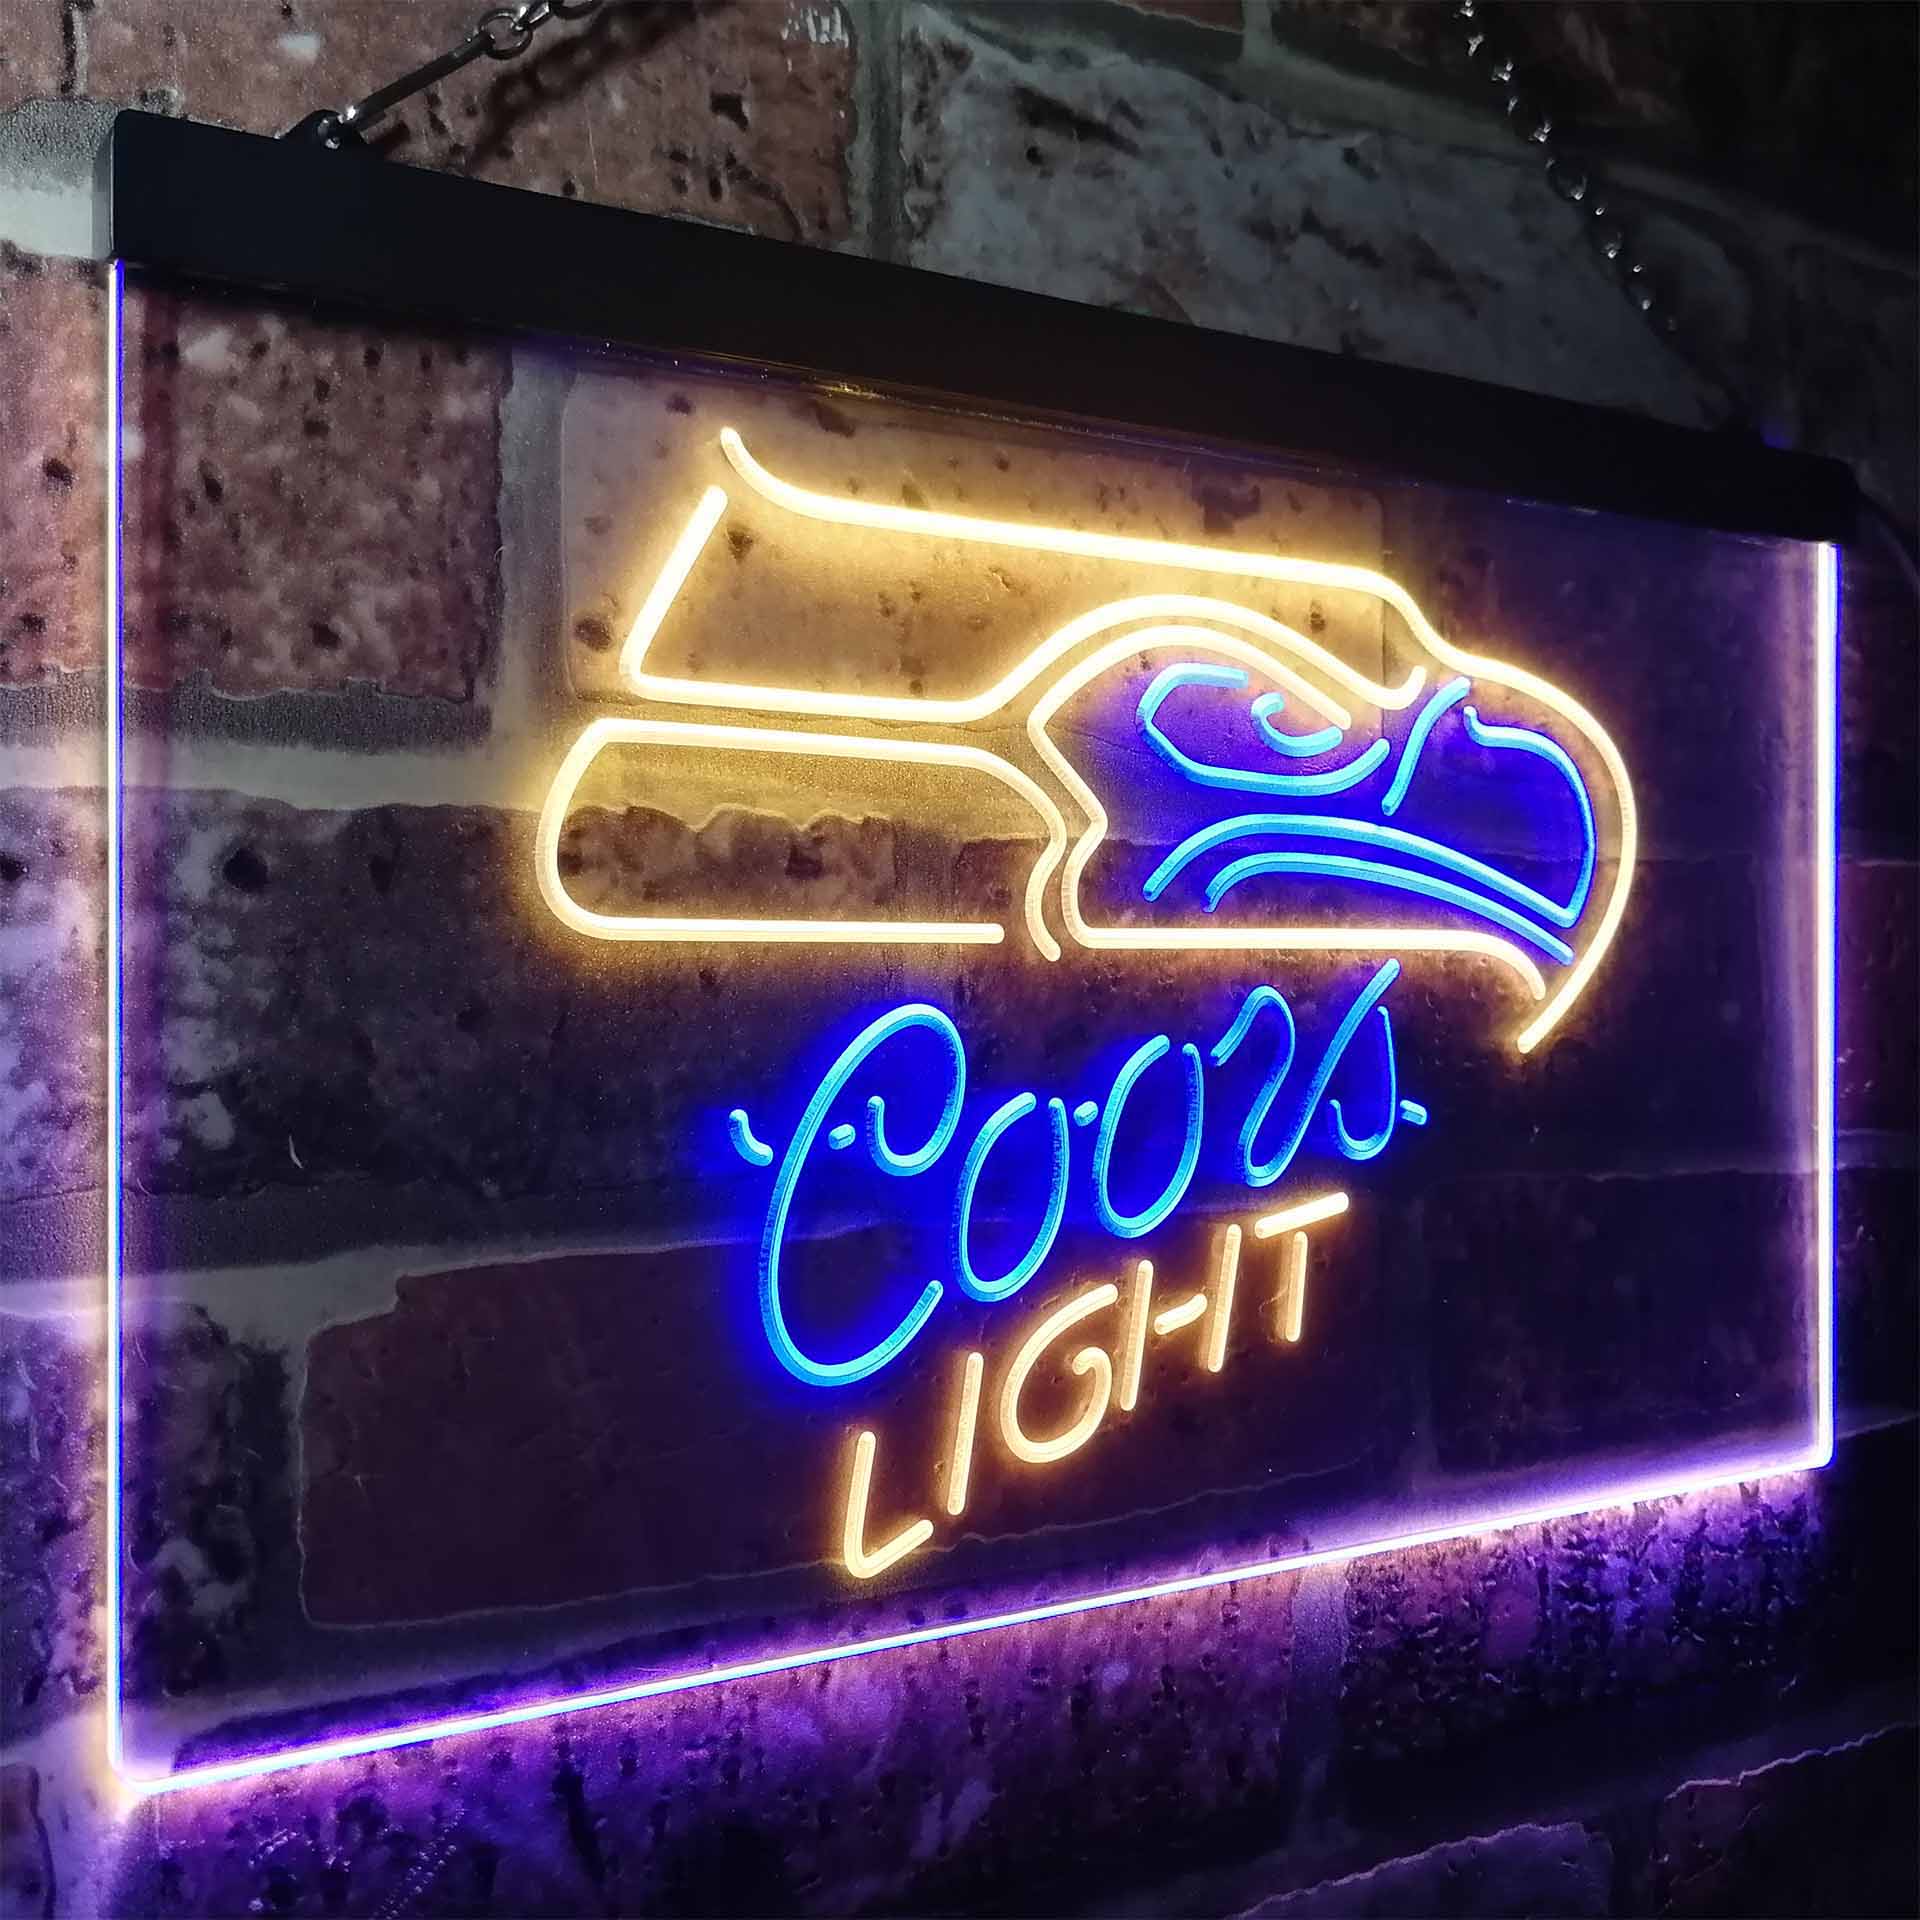 Seattle Seahawks Coors Light LED Neon Sign